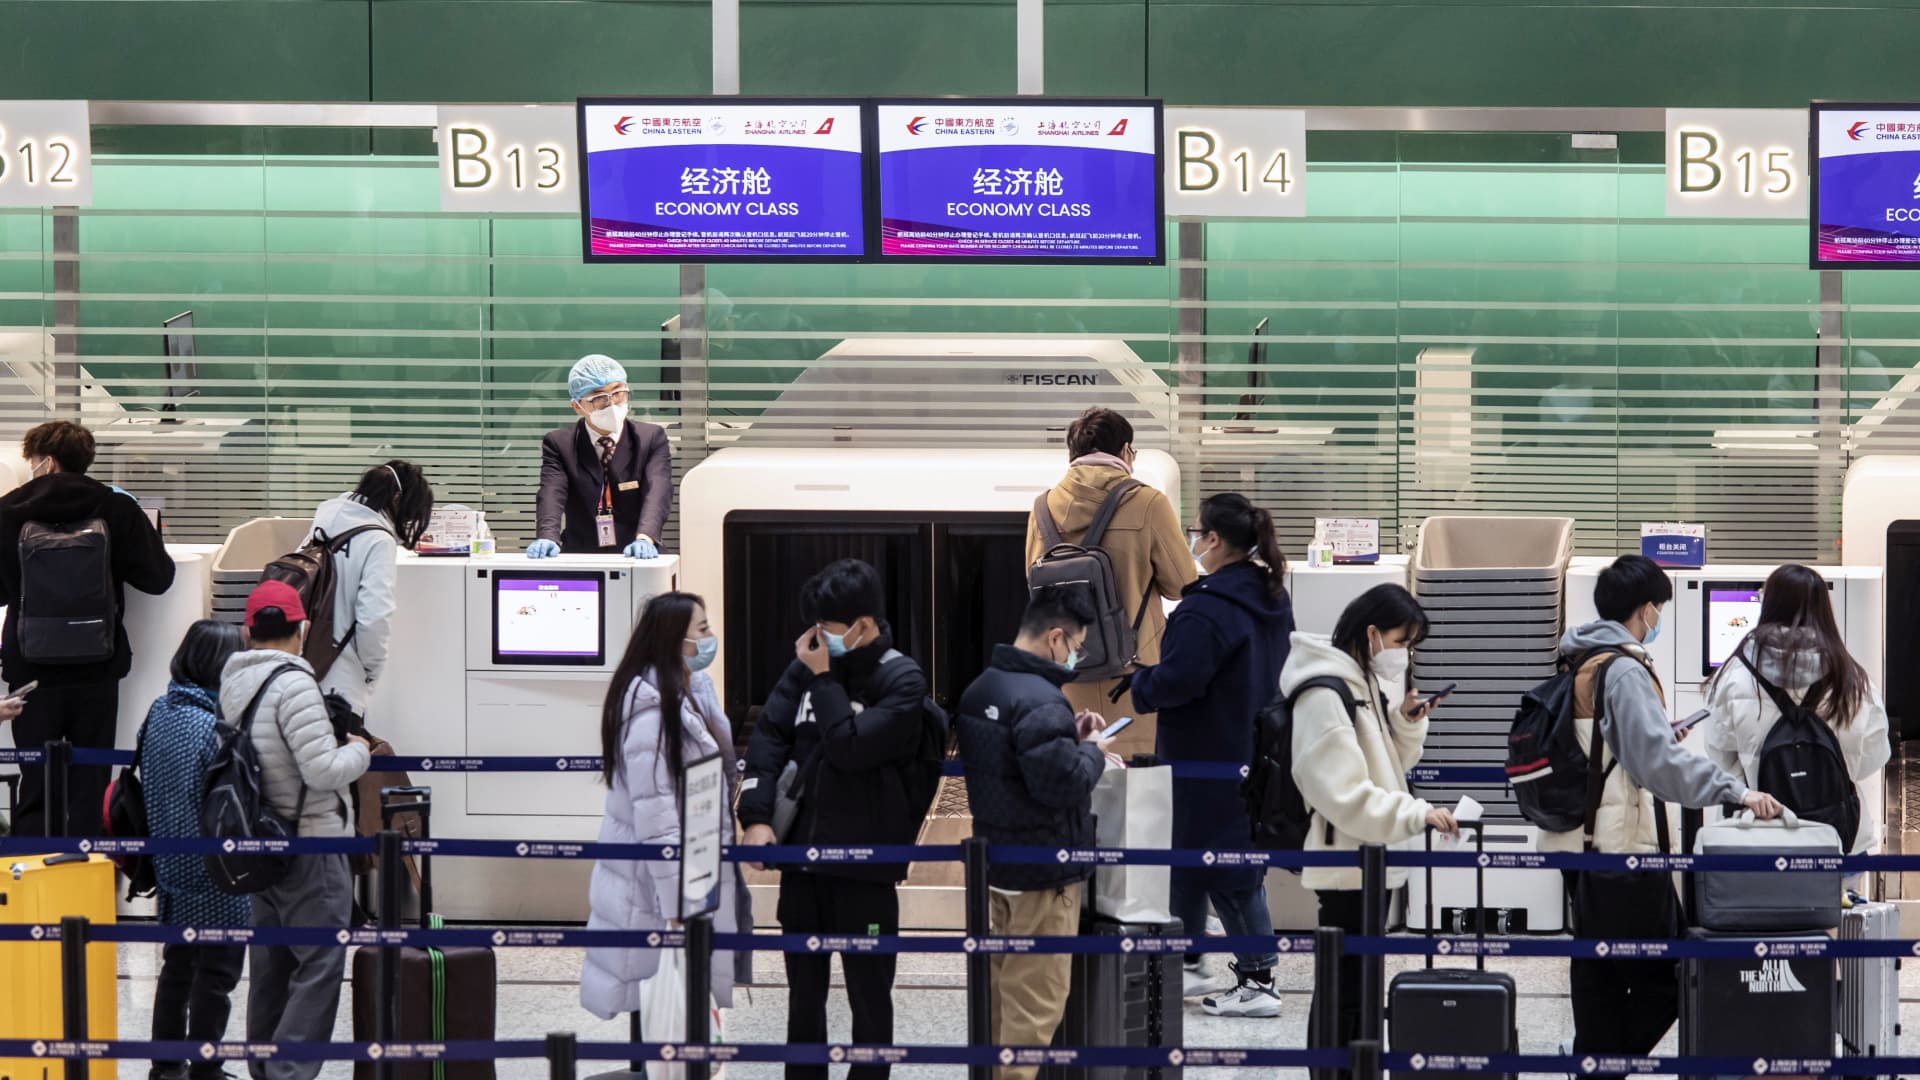 Travelers check in at Shanghai's Hongqiao International Airport in on Dec. 12, 2022, after China relaxed domestic travel restrictions.